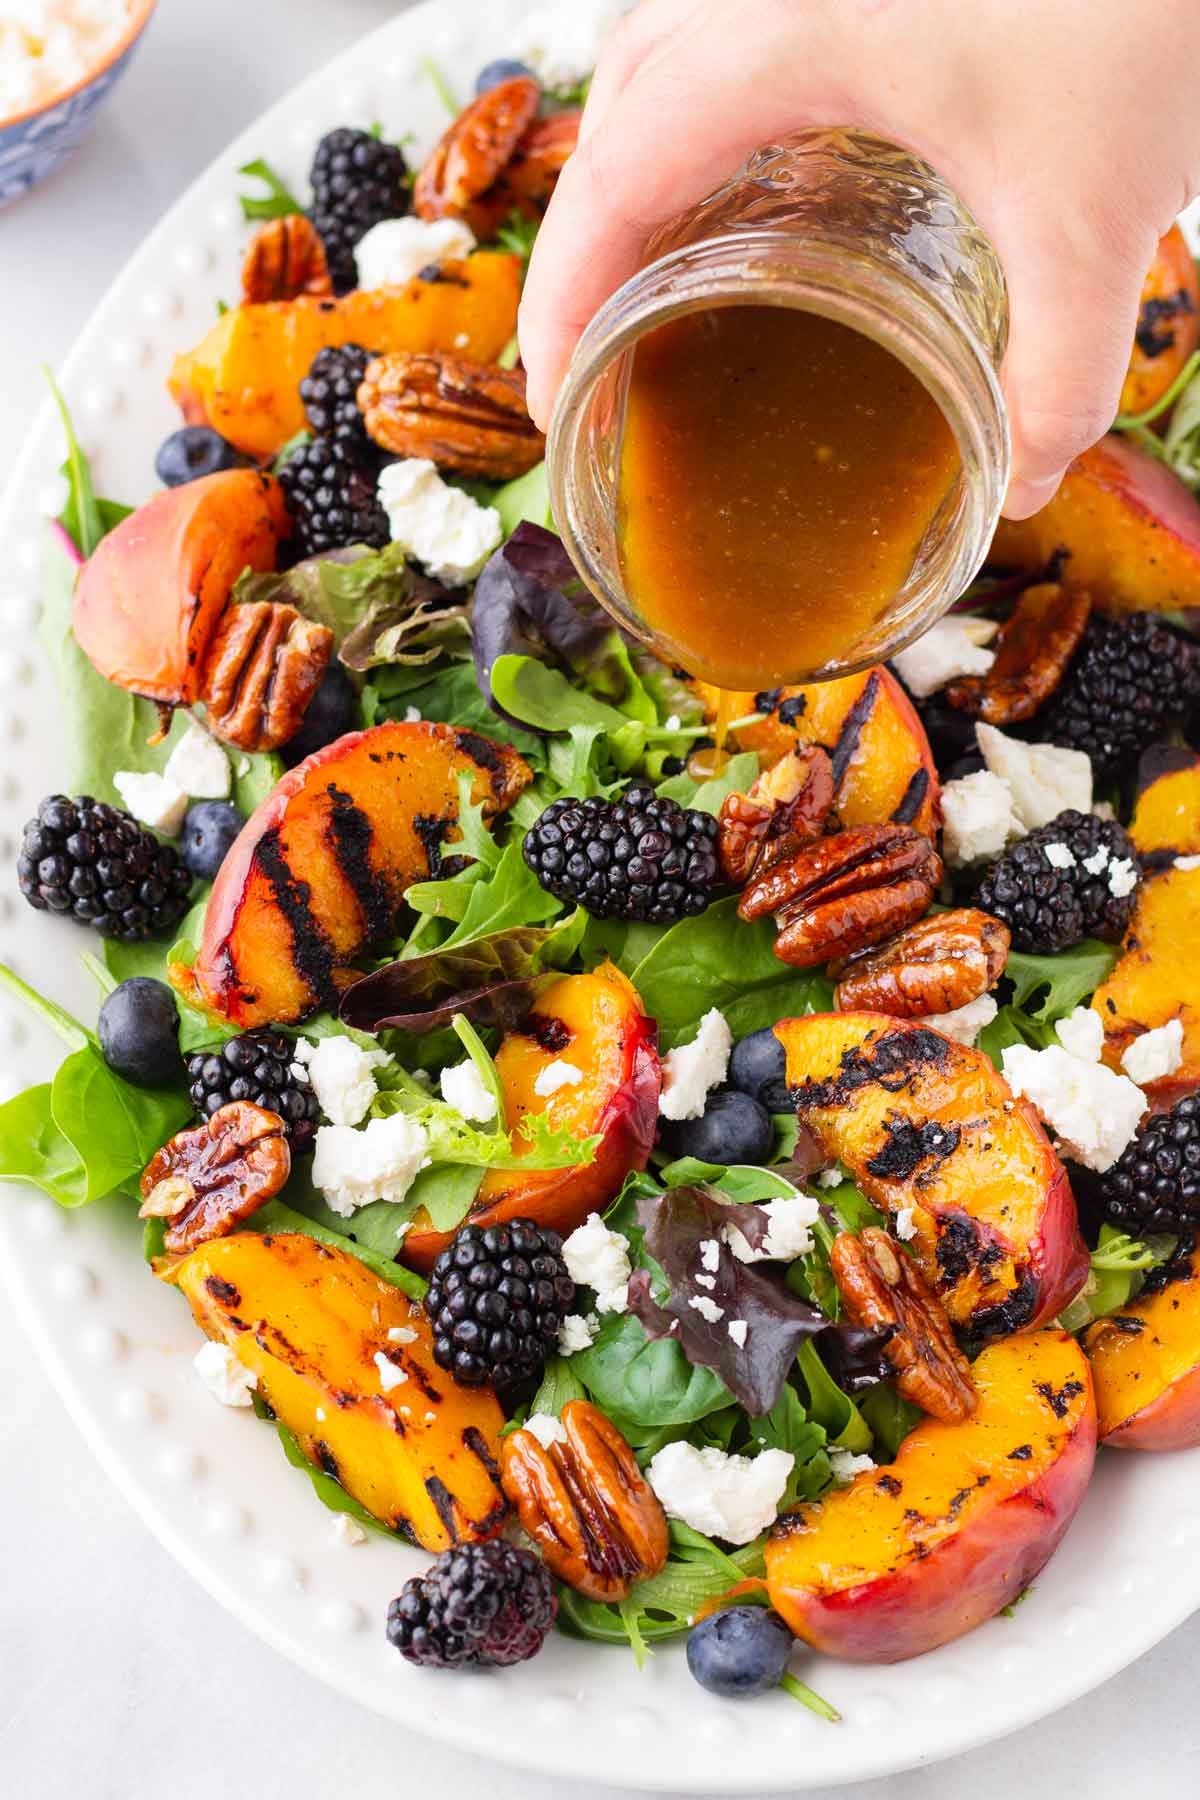 drizzling balsamic dressing onto salad